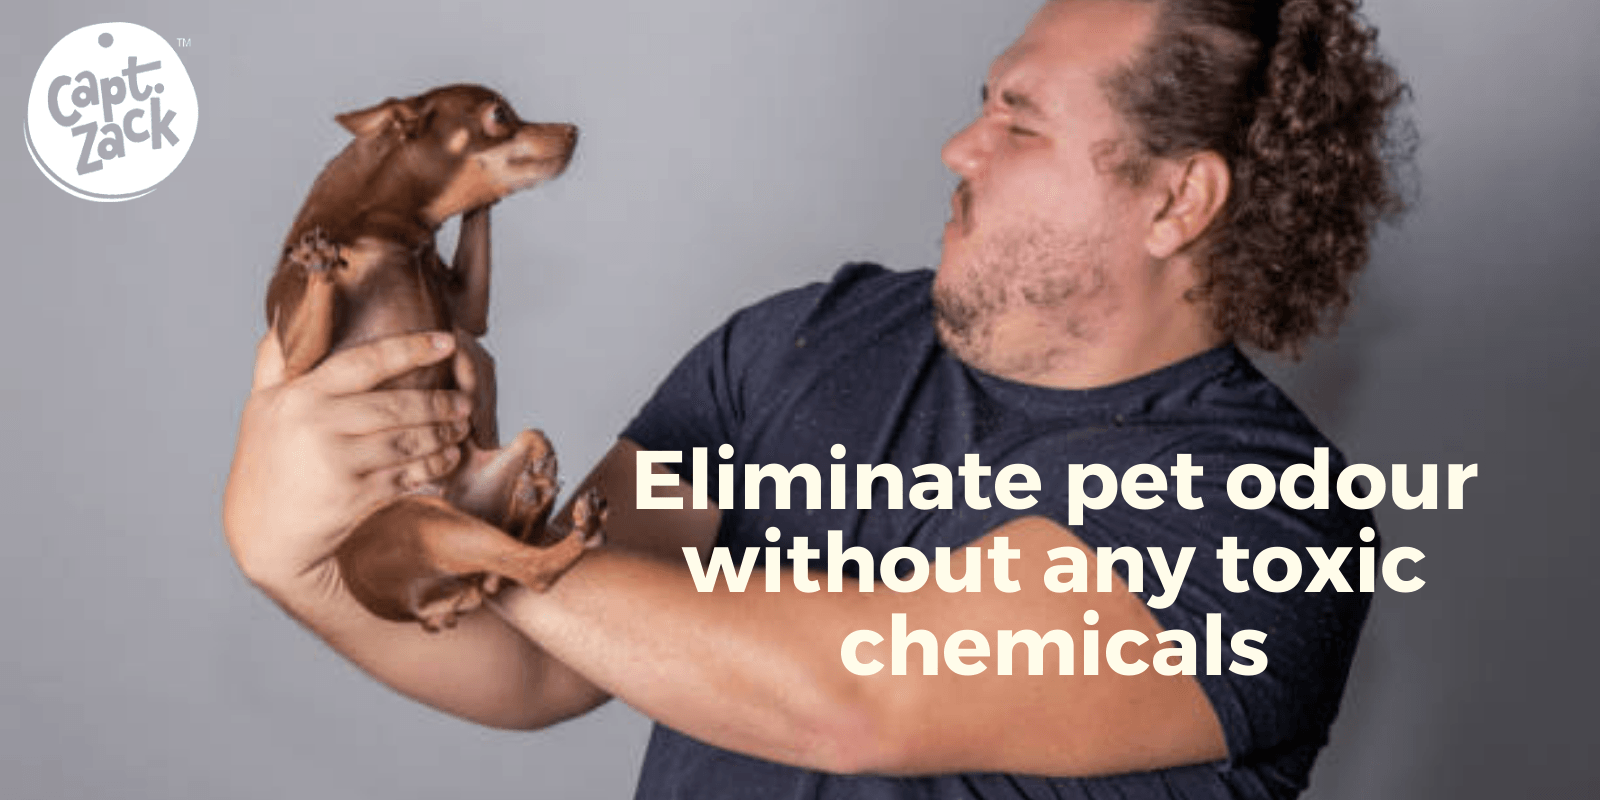 Eliminate pet odor without any toxic chemicals - Captain Zack